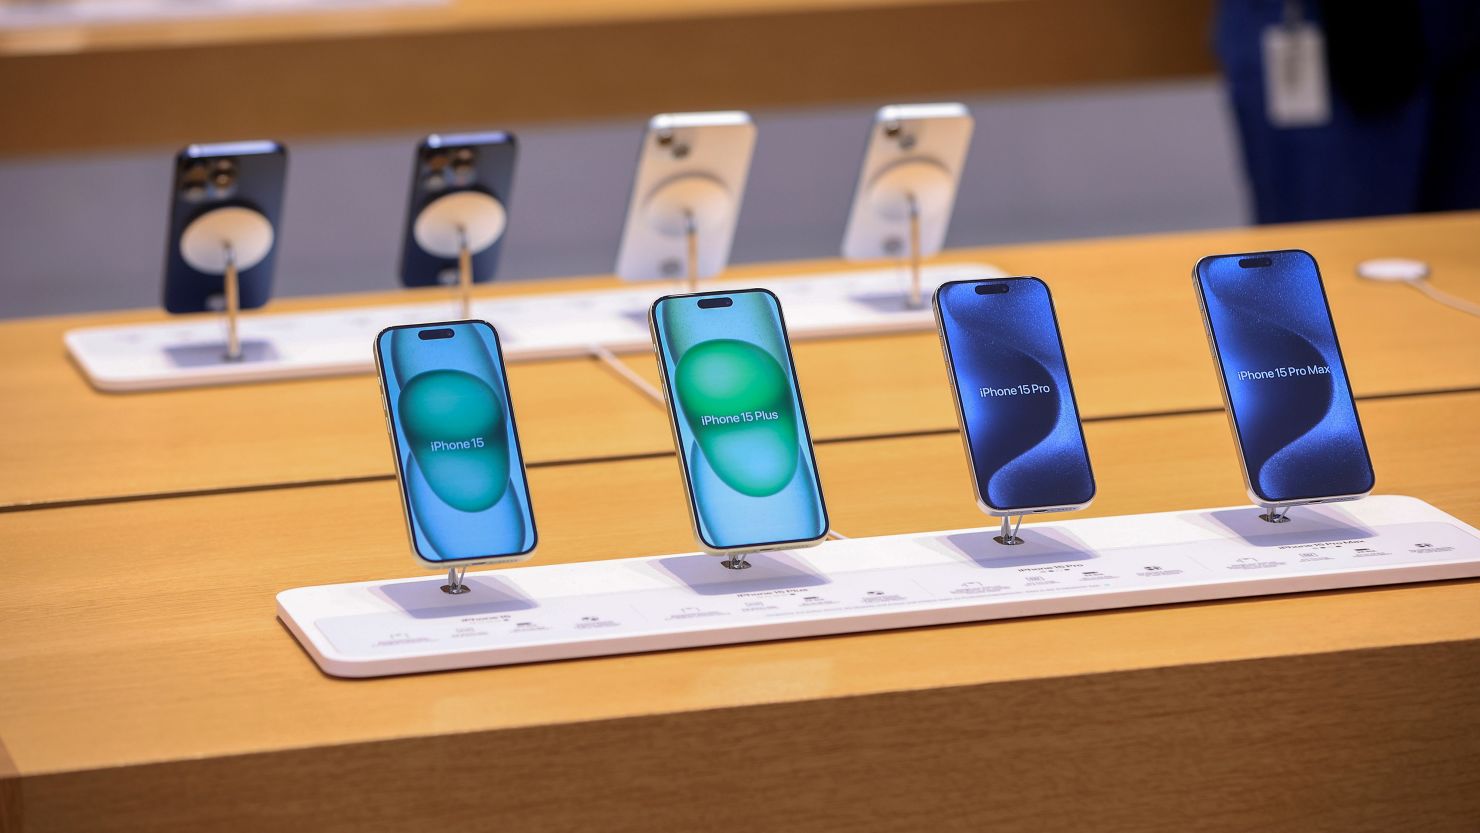 A display of the new range of iPhone 15 smartphones at the Apple Inc. Rosenthaler Strasse store in Berlin, Germany, on Friday, Sept. 22, 2023.